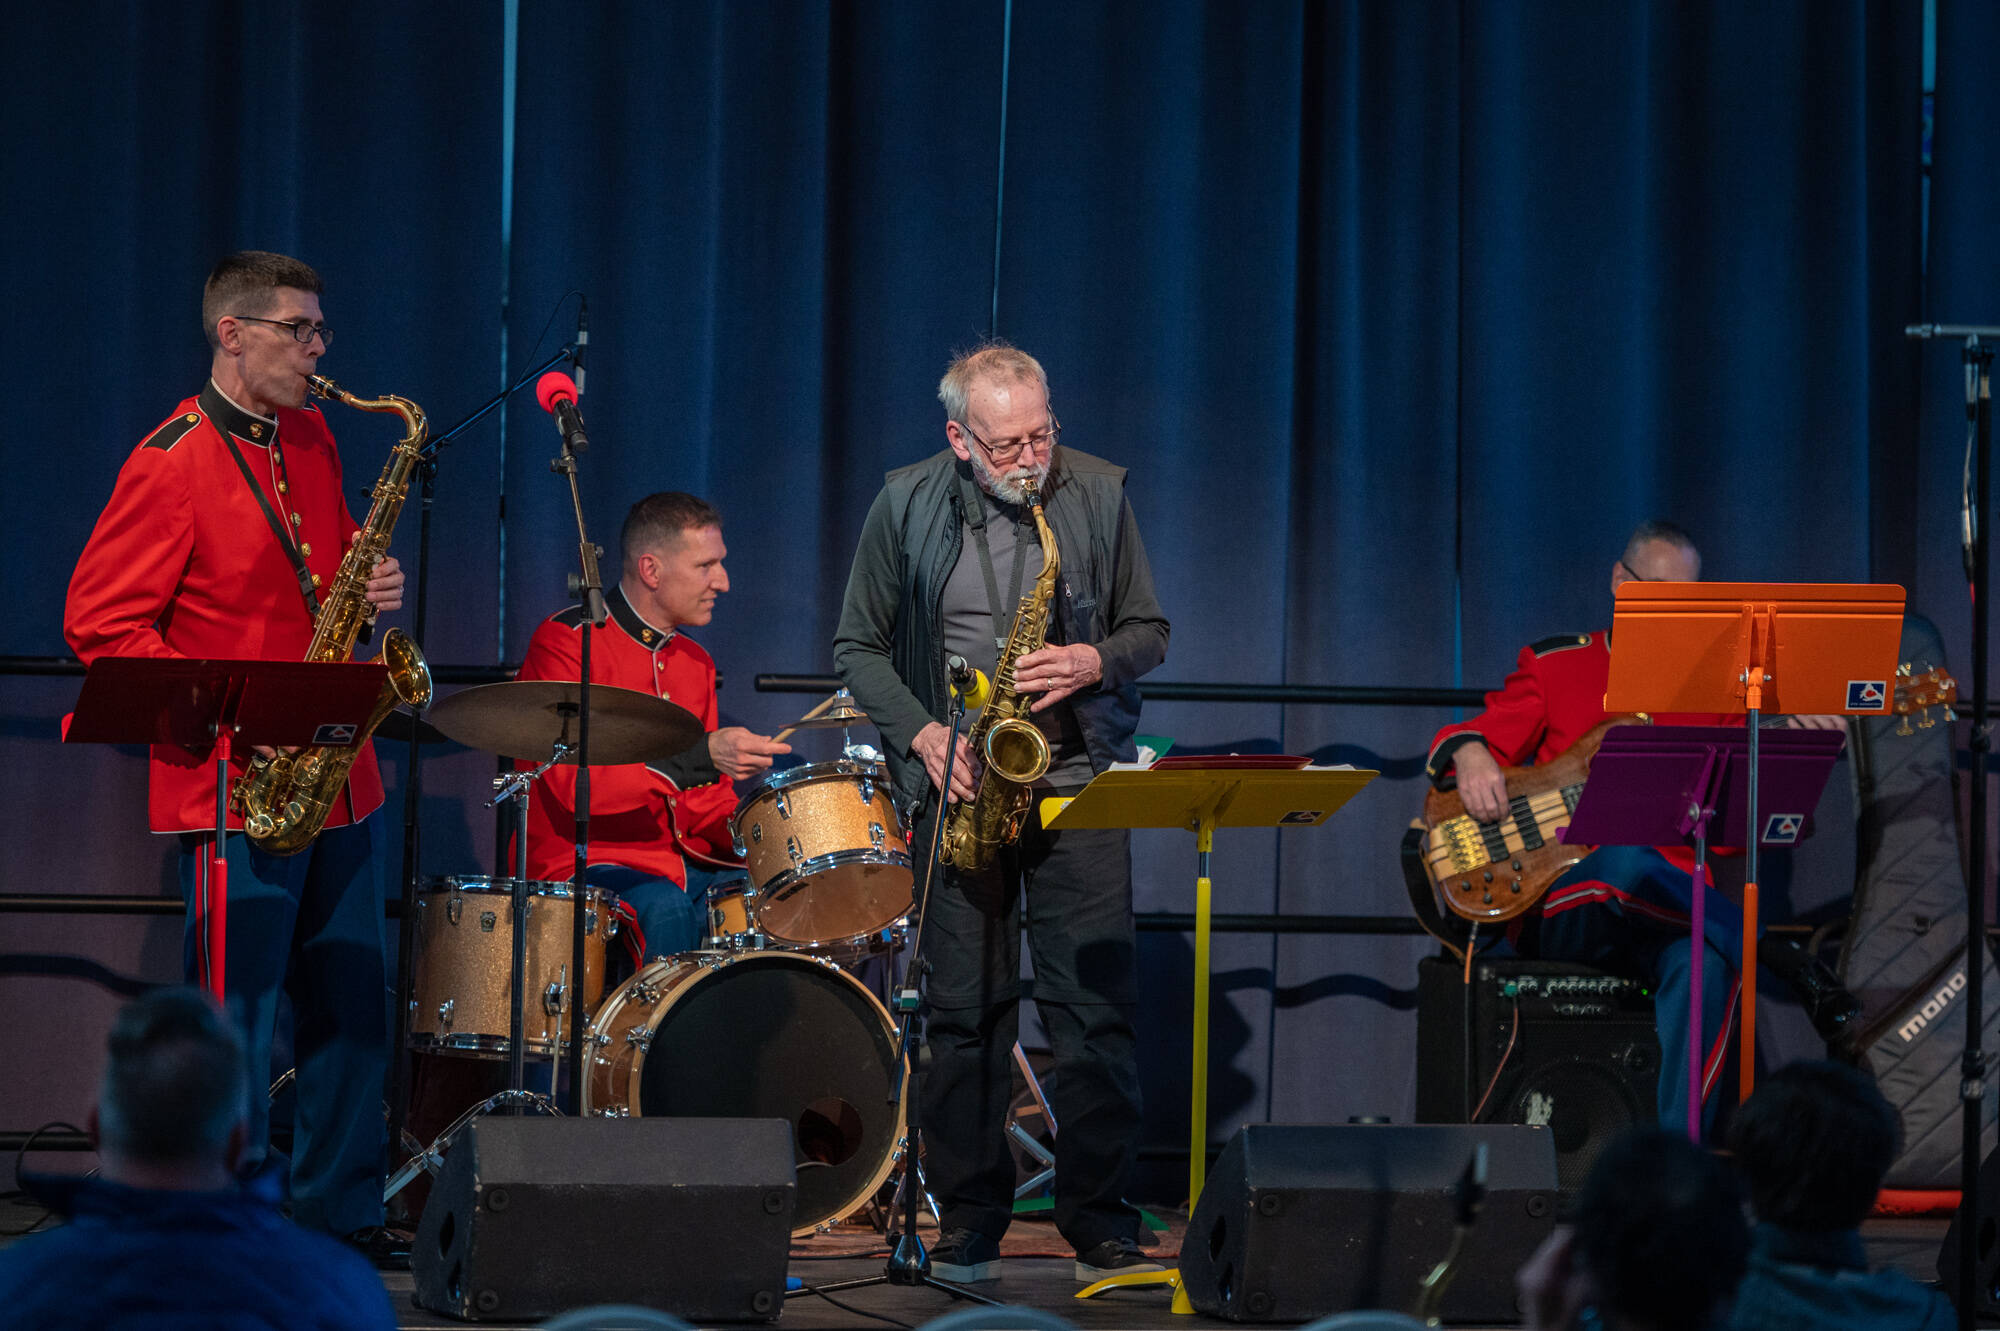 Jon Haywood, a longtime Juneau resident, takes center stage with his 1940s alto saxophone for a performance of the jazz standard “Four” during a jam session with The “President’s Own” U.S. Marine Jazz Band at the Juneau Arts and Culture Center on Wednesday. (Courtesy Photo)